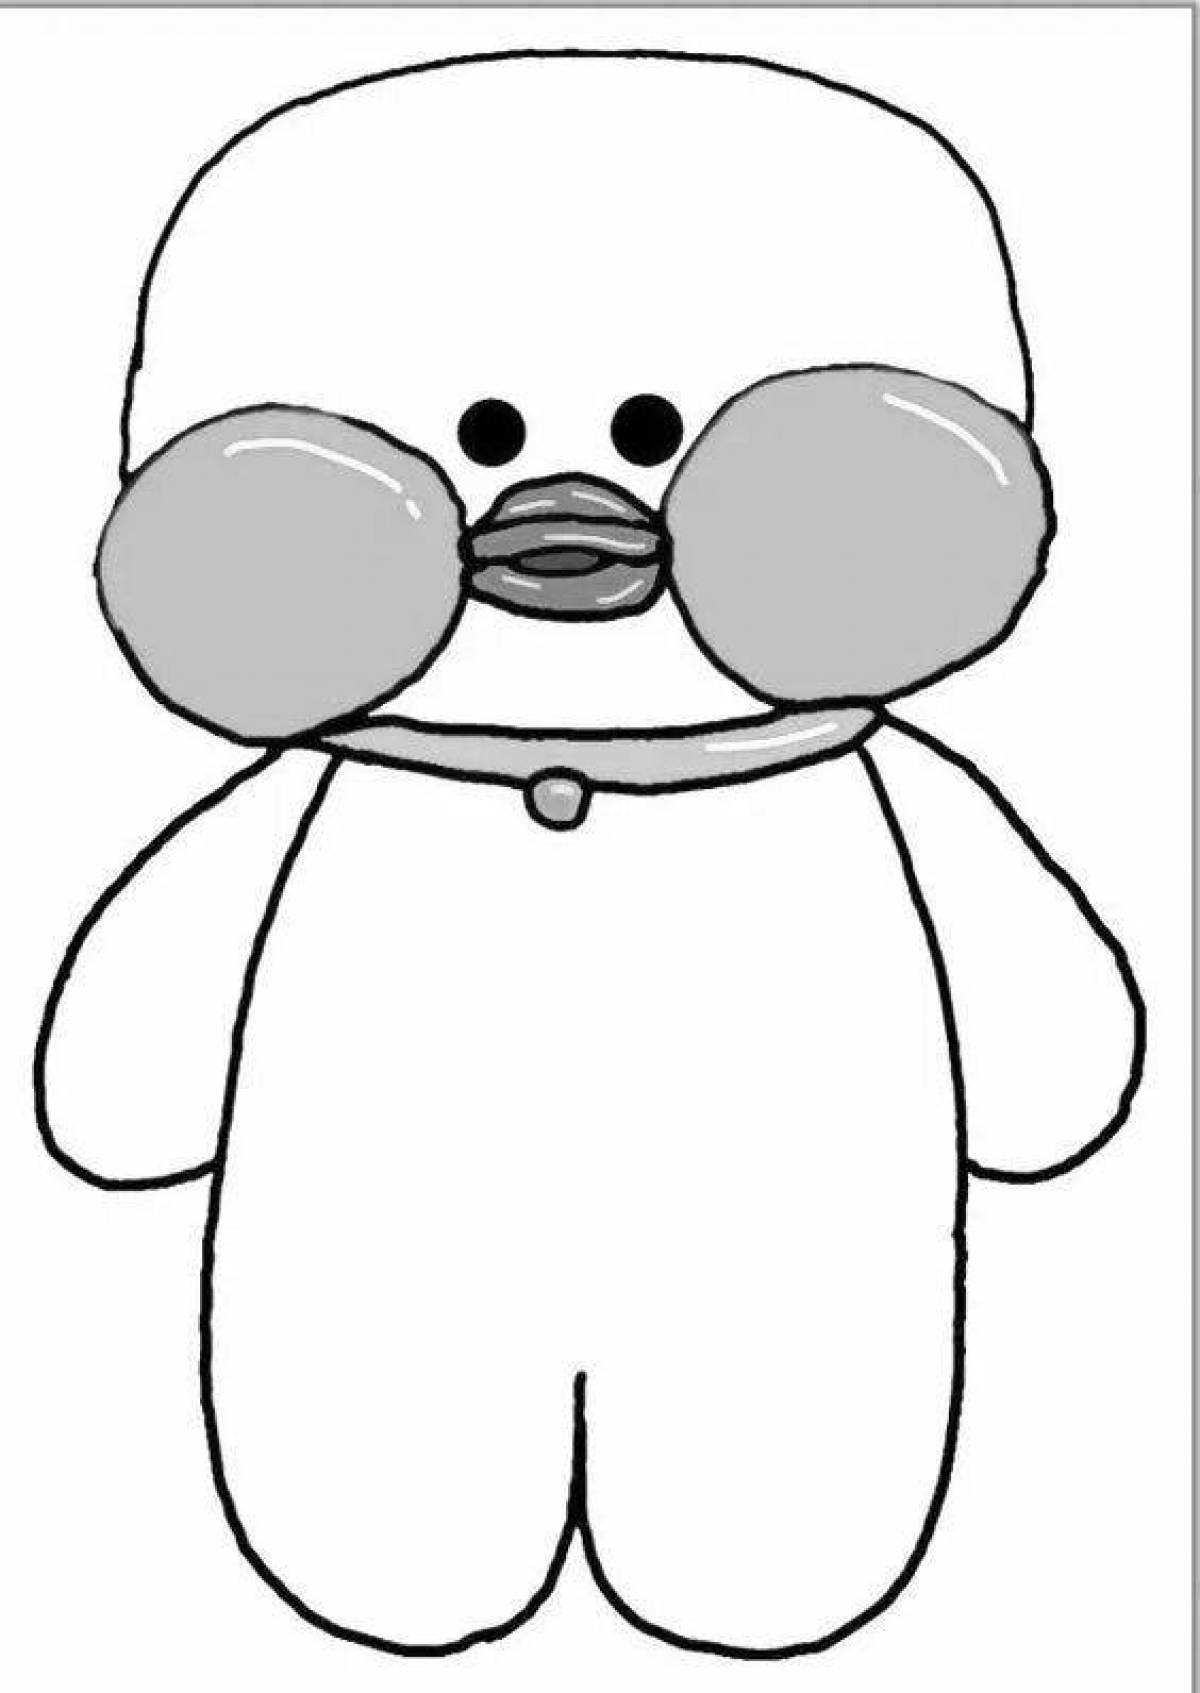 Witty duck coloring pages lala fanfan